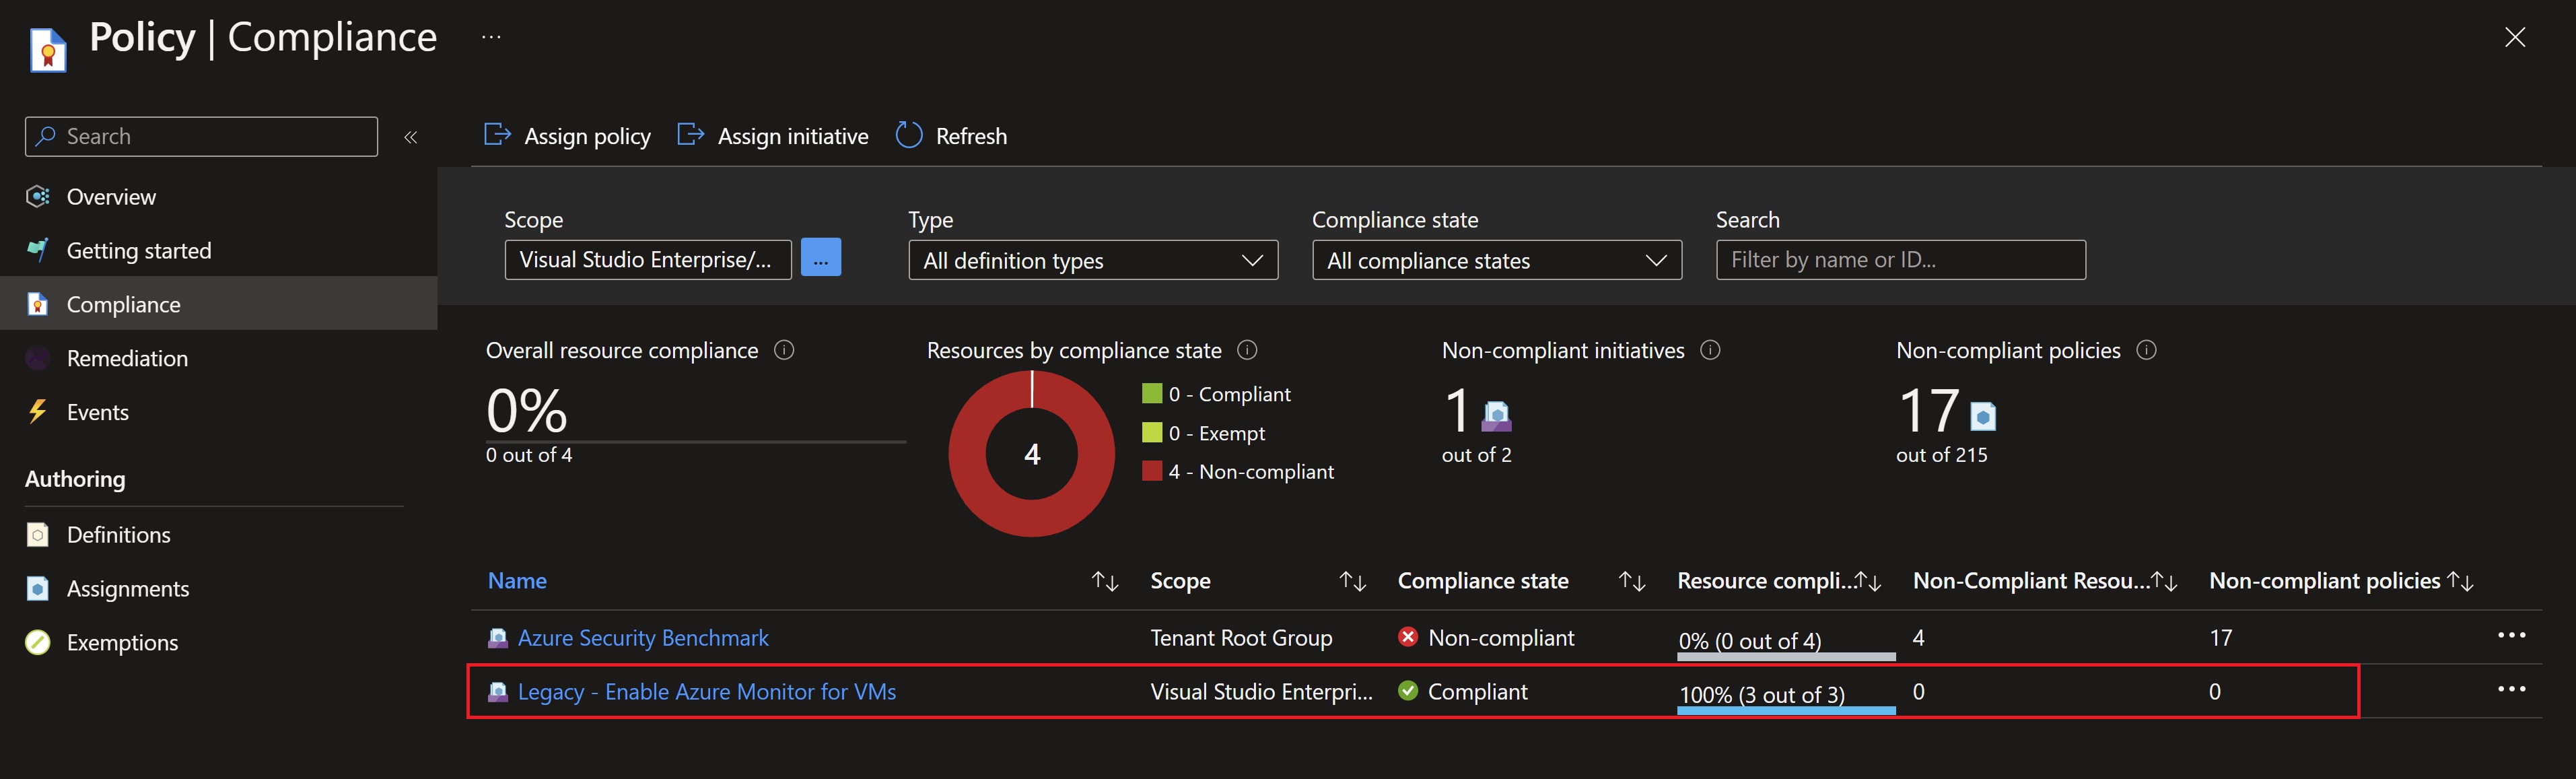 Screenshot showing Azure Policy assigned to enable azure Monitor